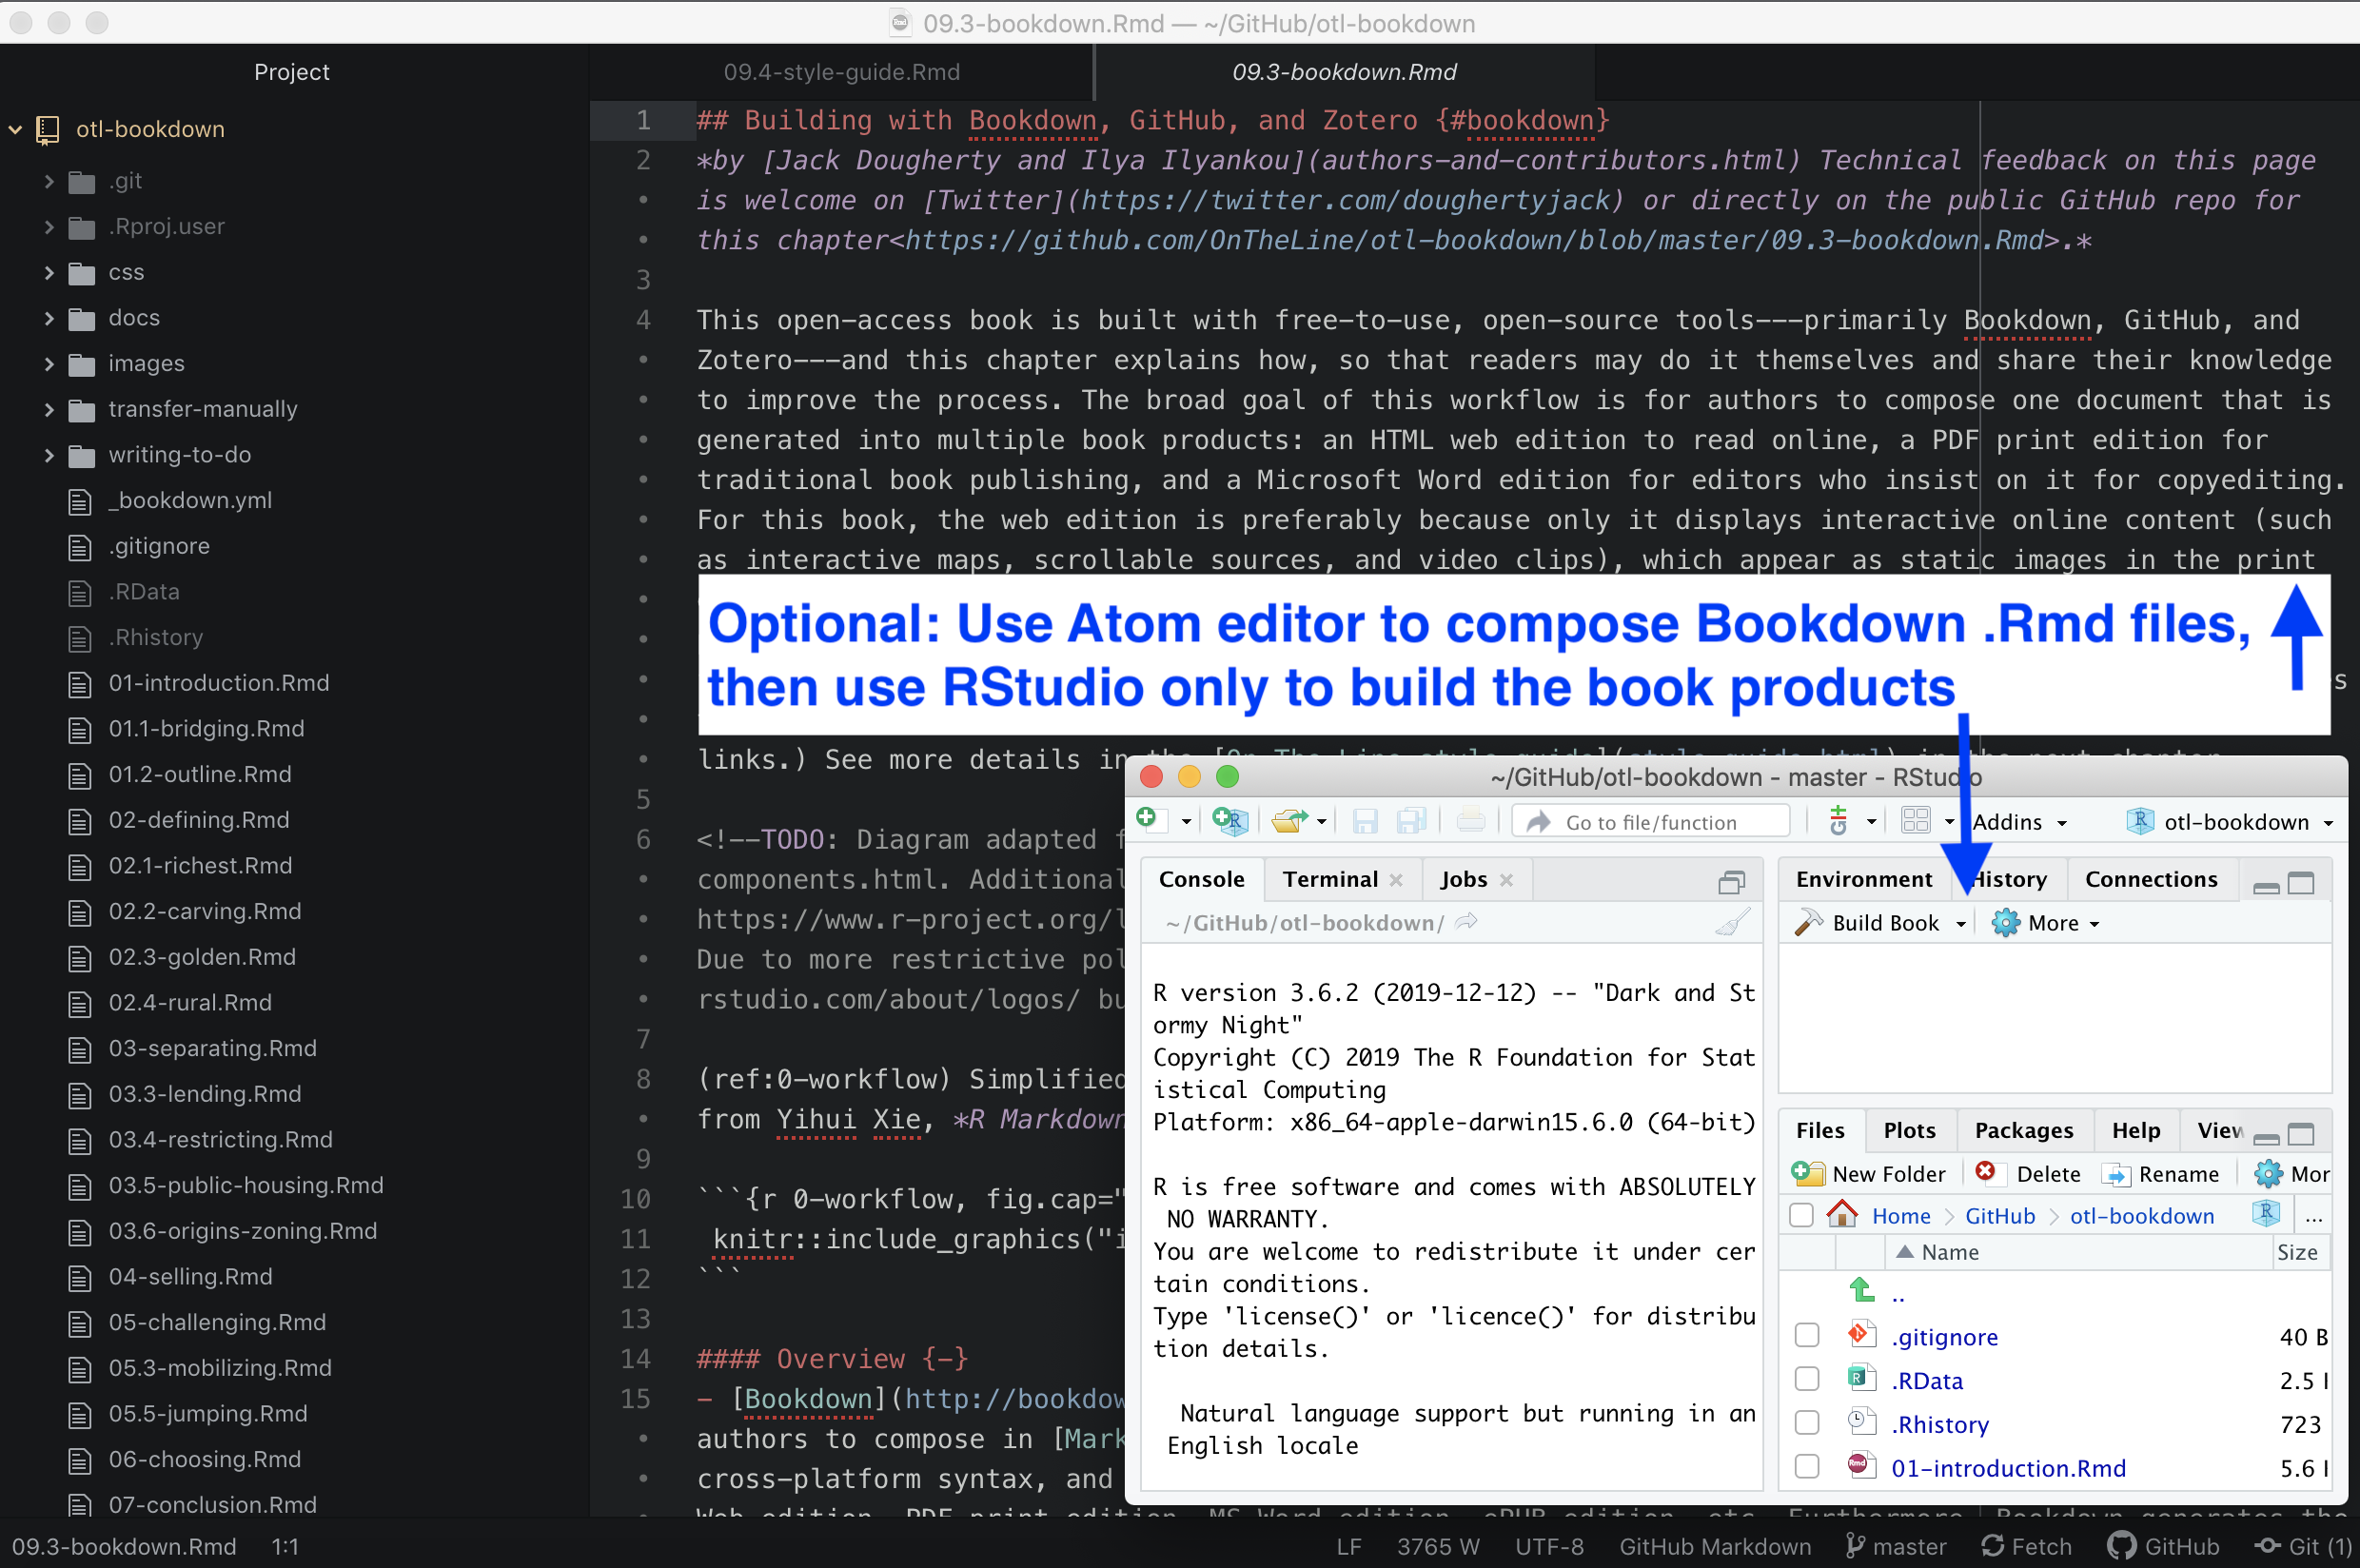 Variation on the workflow above: Compose the text in your preferred editor (such as Atom), and use RStudio only to build the book products.